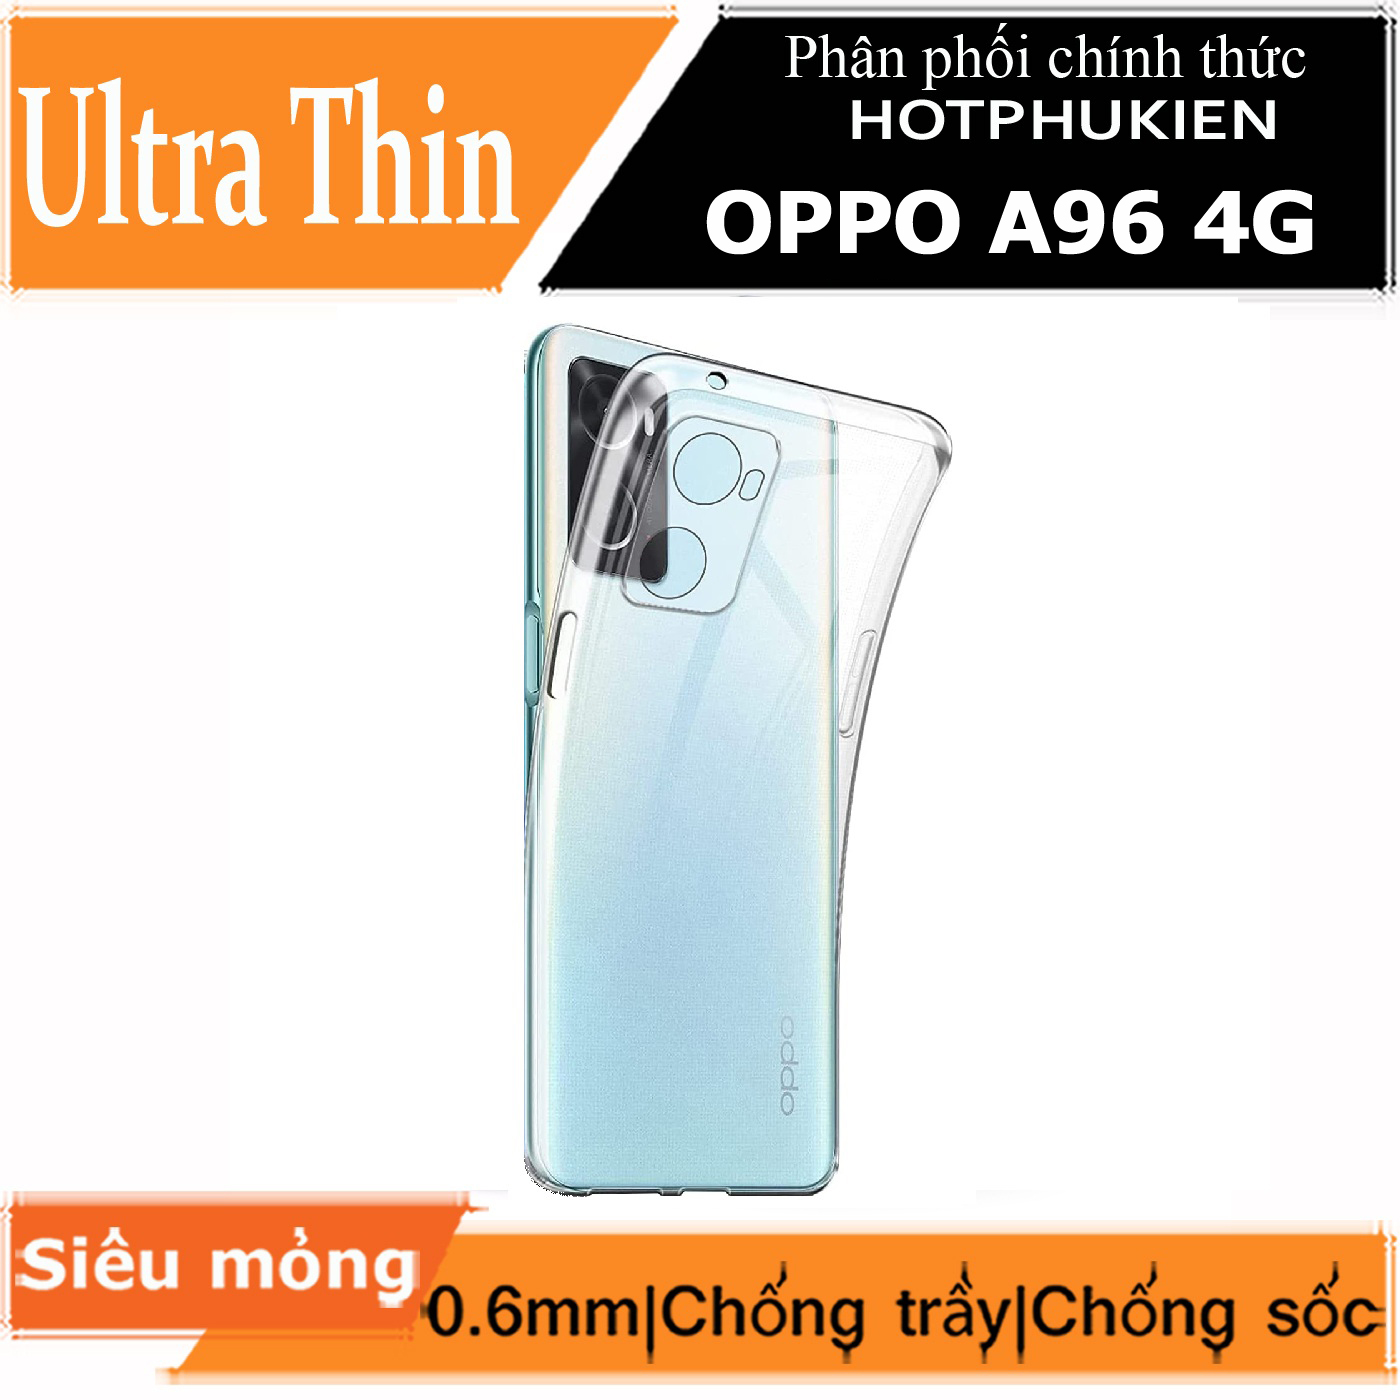 Ốp lưng silicon dẻo cho Oppo A96 4G hiệu Ultra Thin trong suốt